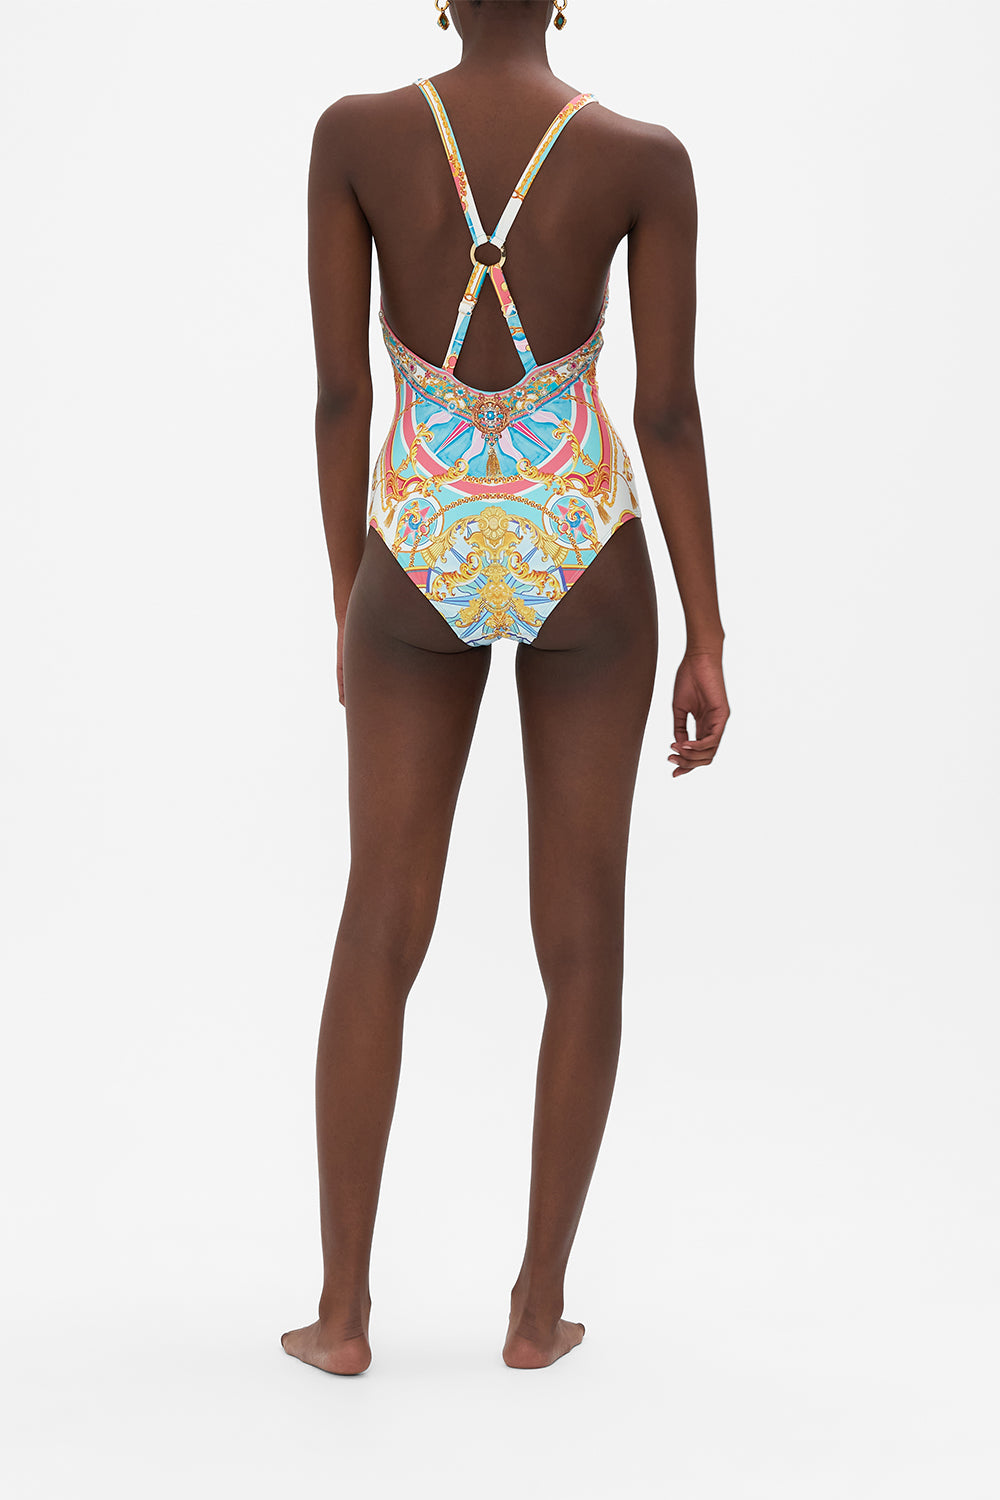 CAMILLA RING DETAIL PLUNGE ONE PIECE - SAIL AWAY WITH ME - ESCAPE CLOTHING